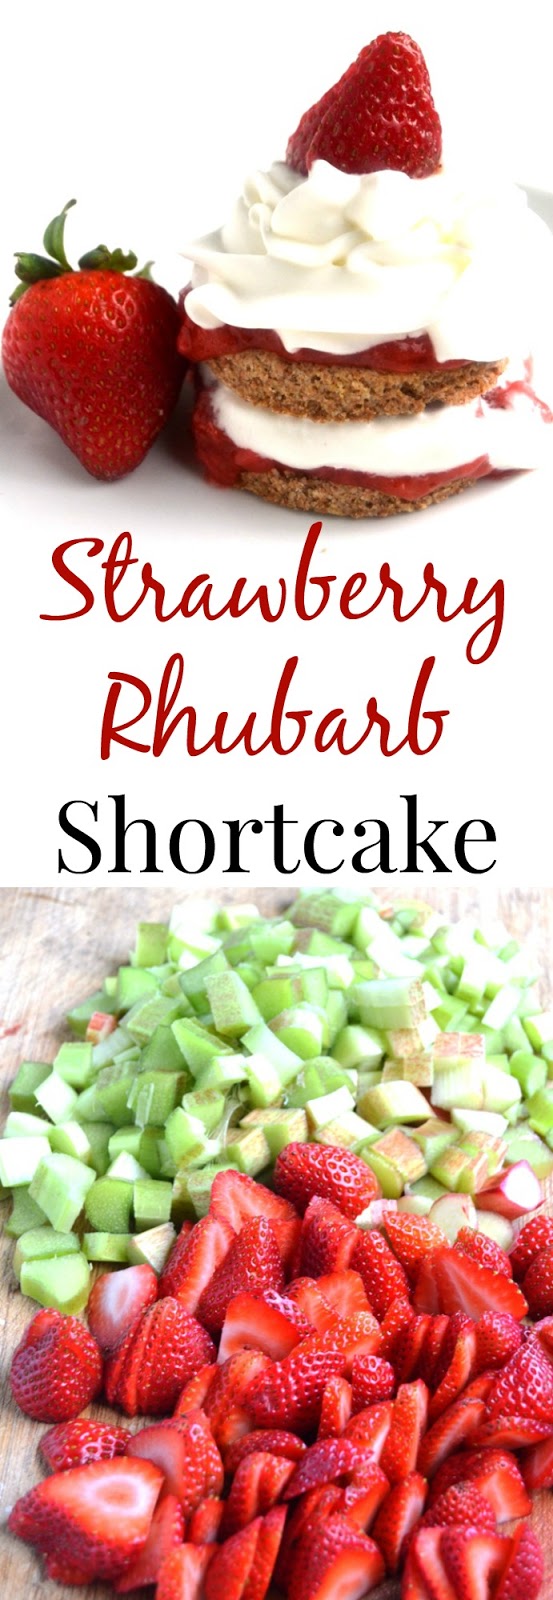 These Strawberry Rhubarb Shortcakes are the perfect summer dessert. The shortcakes are made with only 5 ingredients and the sauce is the perfect mix of sweet and tart! www.nutritionistreviews.com